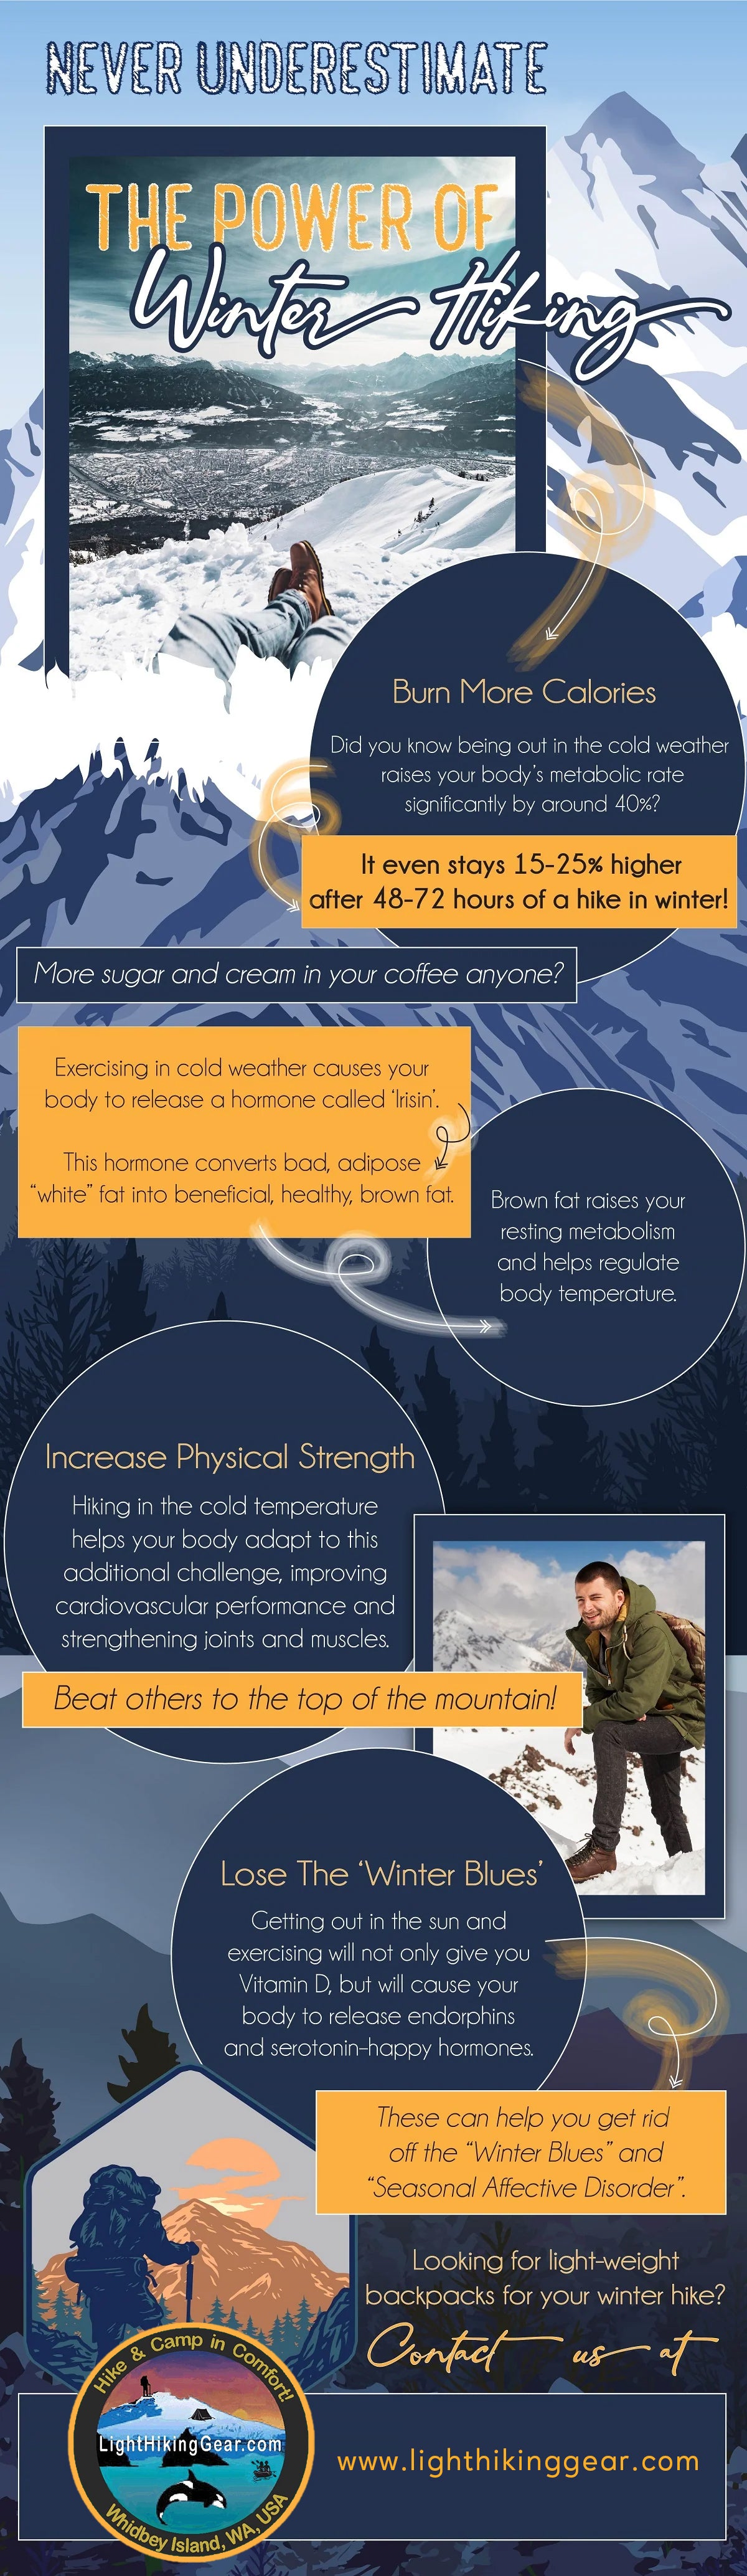 Never Underestimate The Power Of Winter Hiking - Infographic